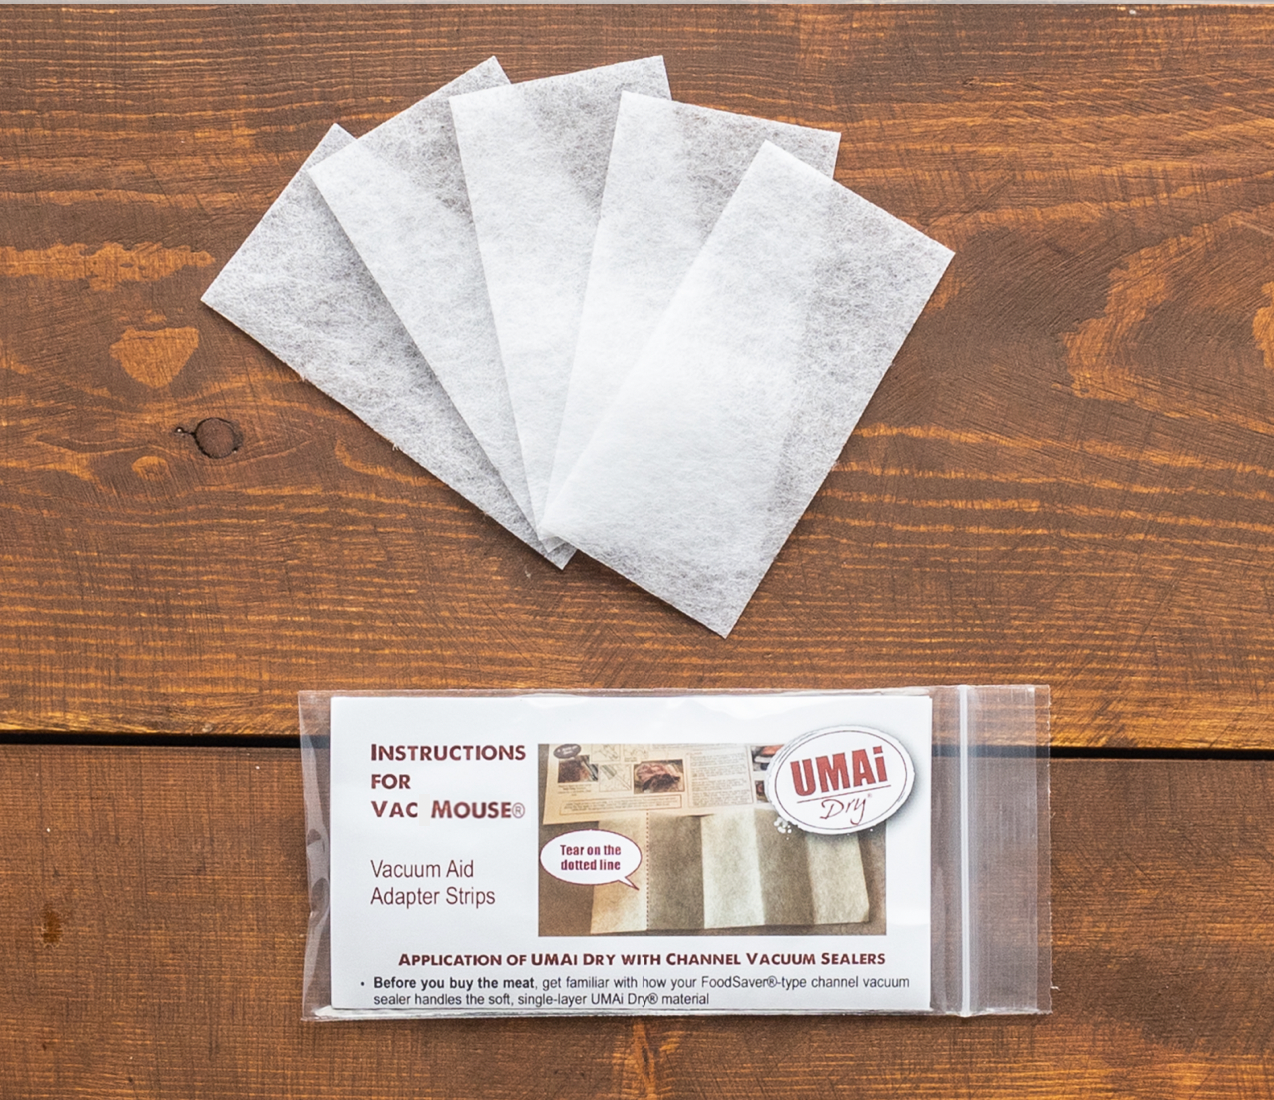 VacMouse packet of vacuum aid strips for in UMai Dry aging bag  Edit alt text